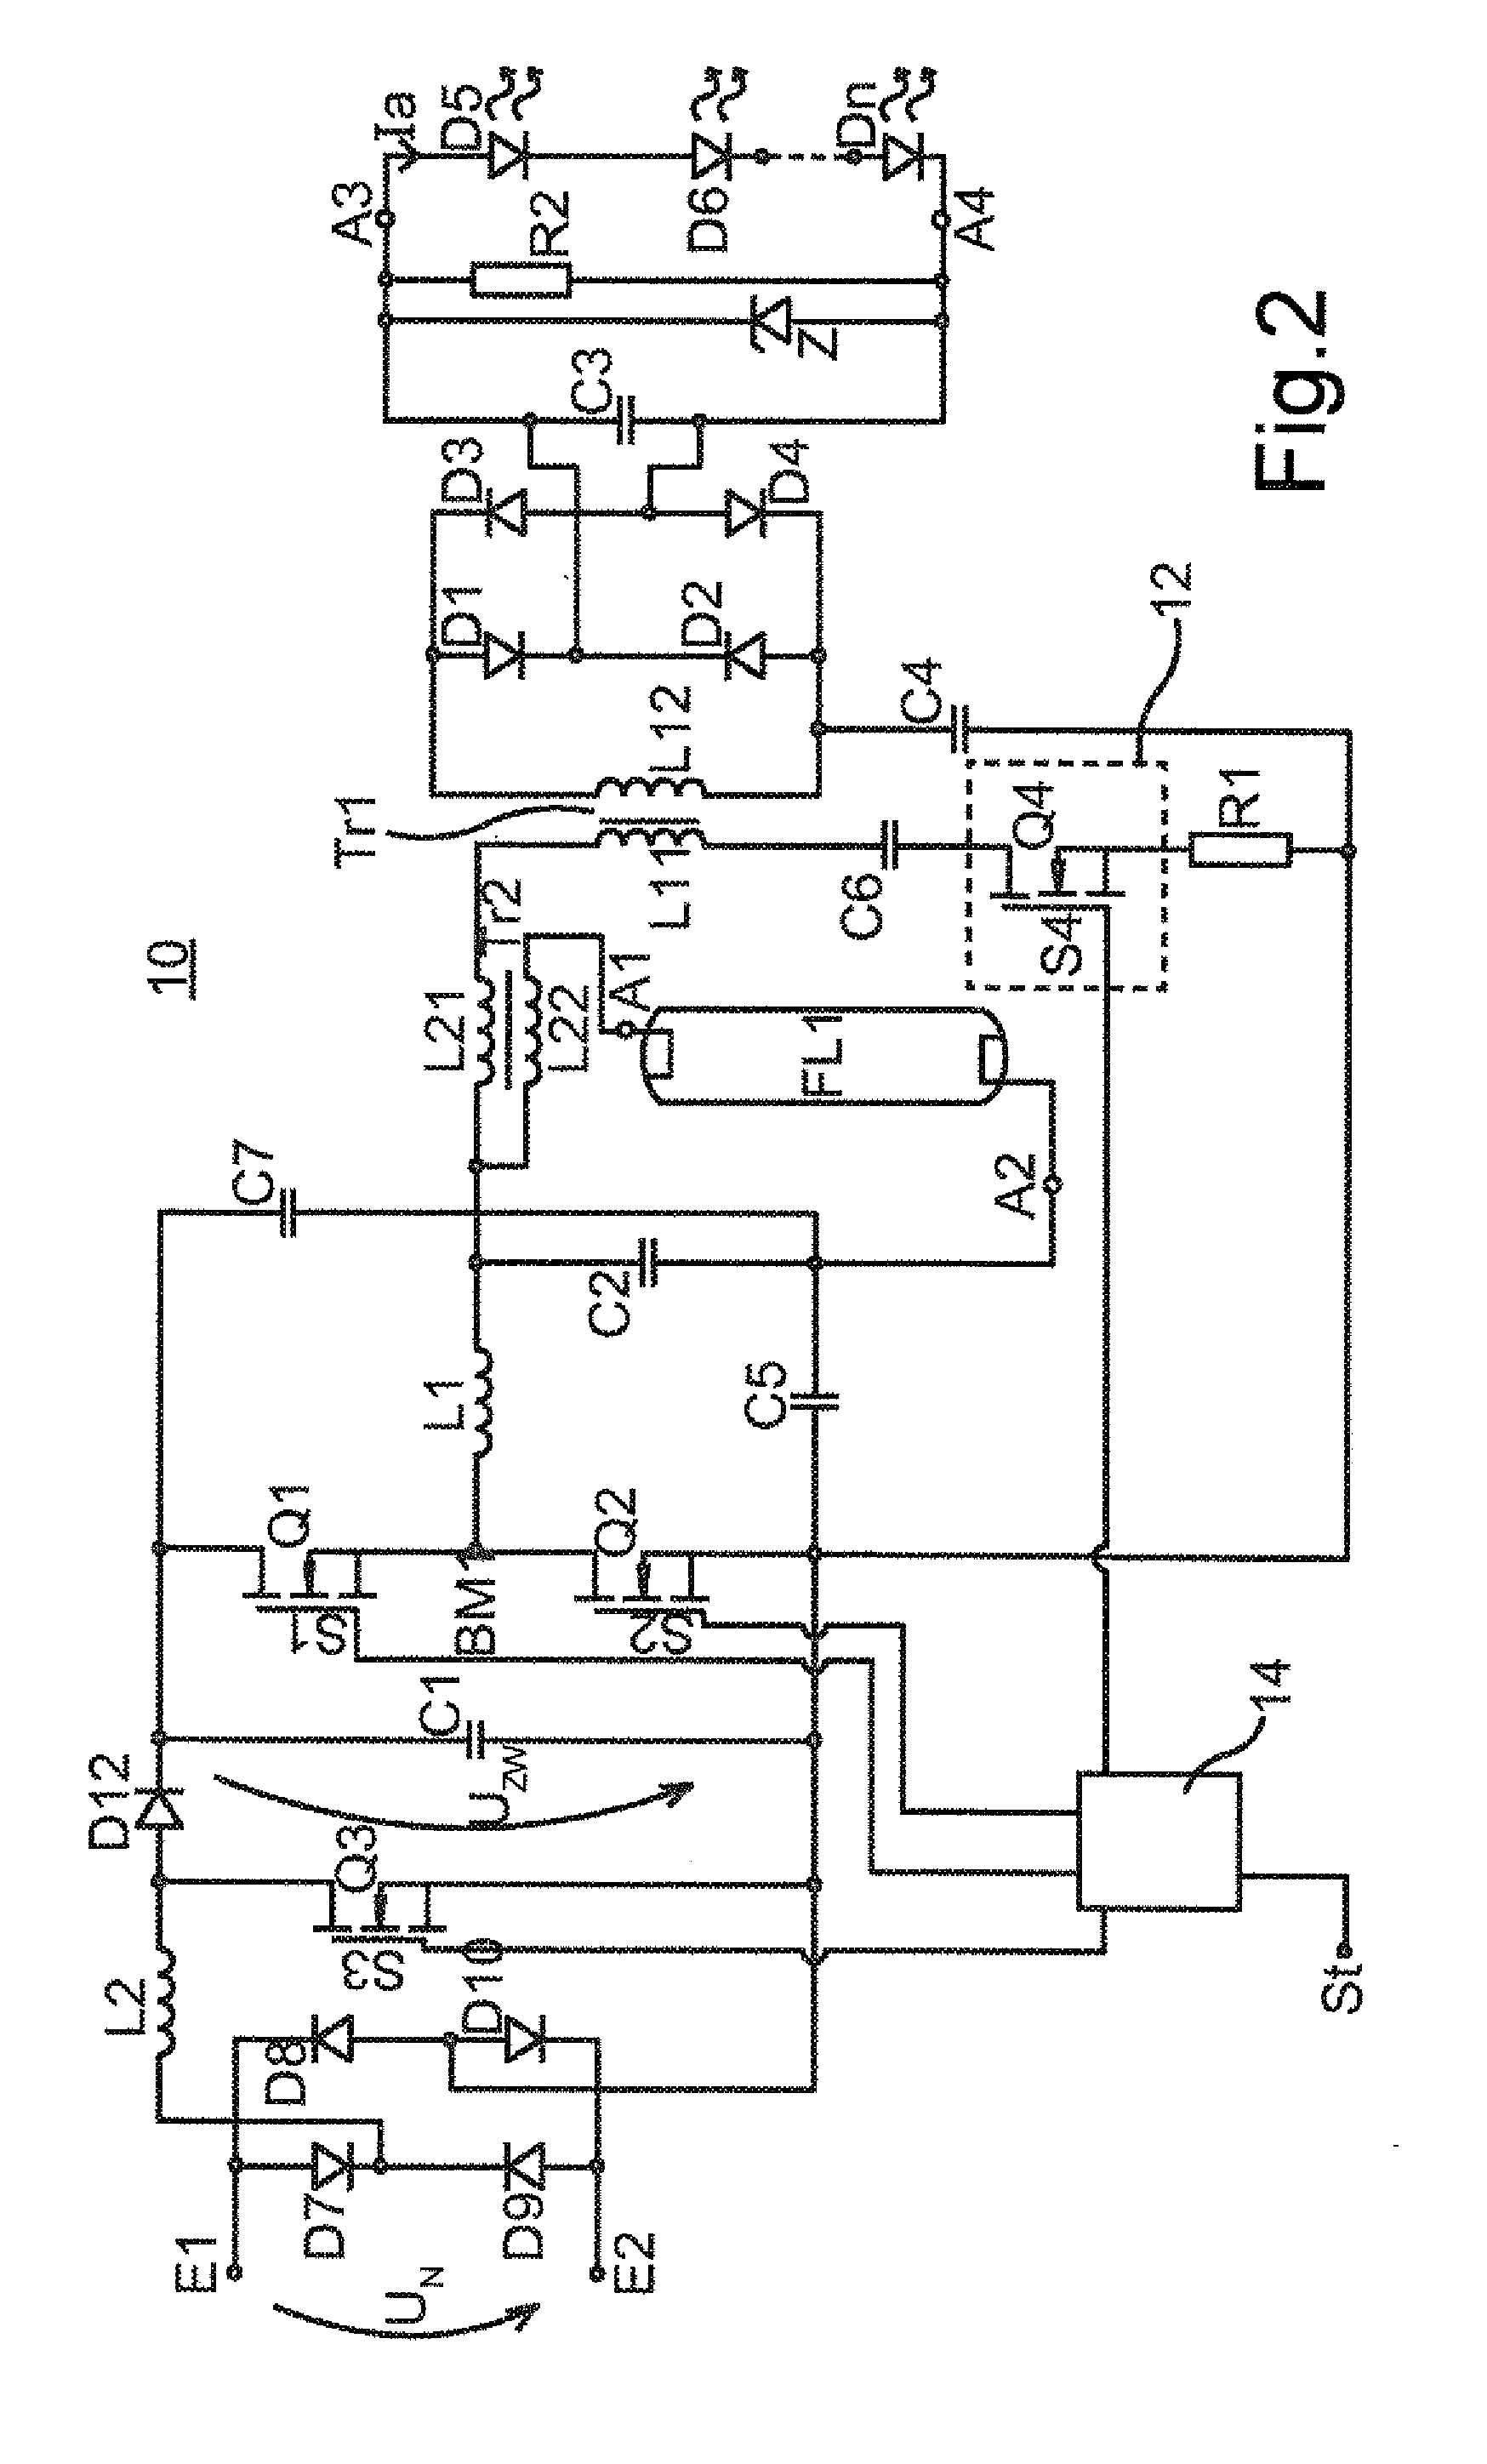 Circuit arrangement for operating at least one discharge lamp and at least one LED